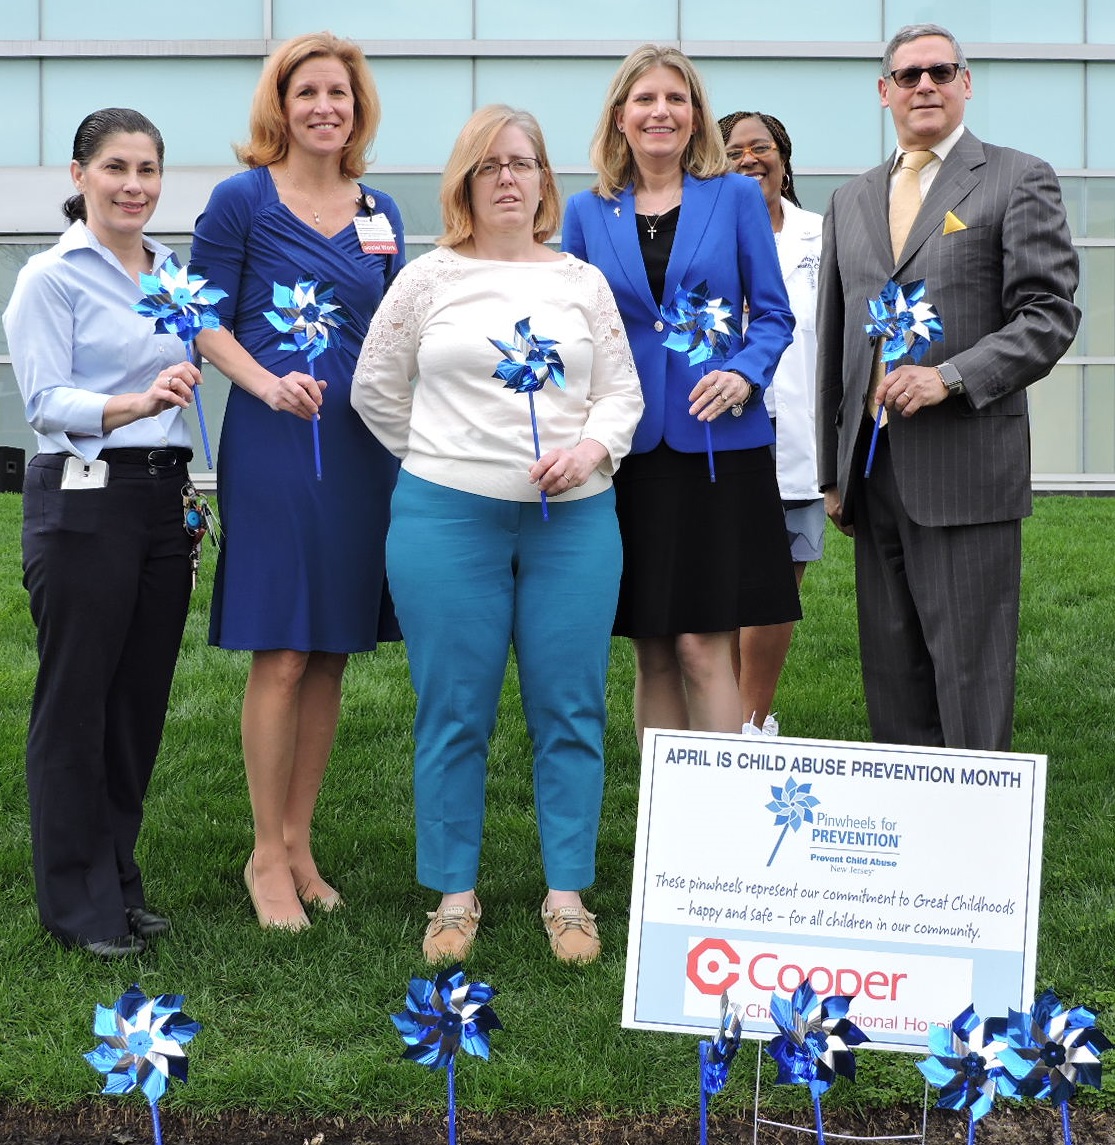 Pinwheels for Prevention group photo at Cooper